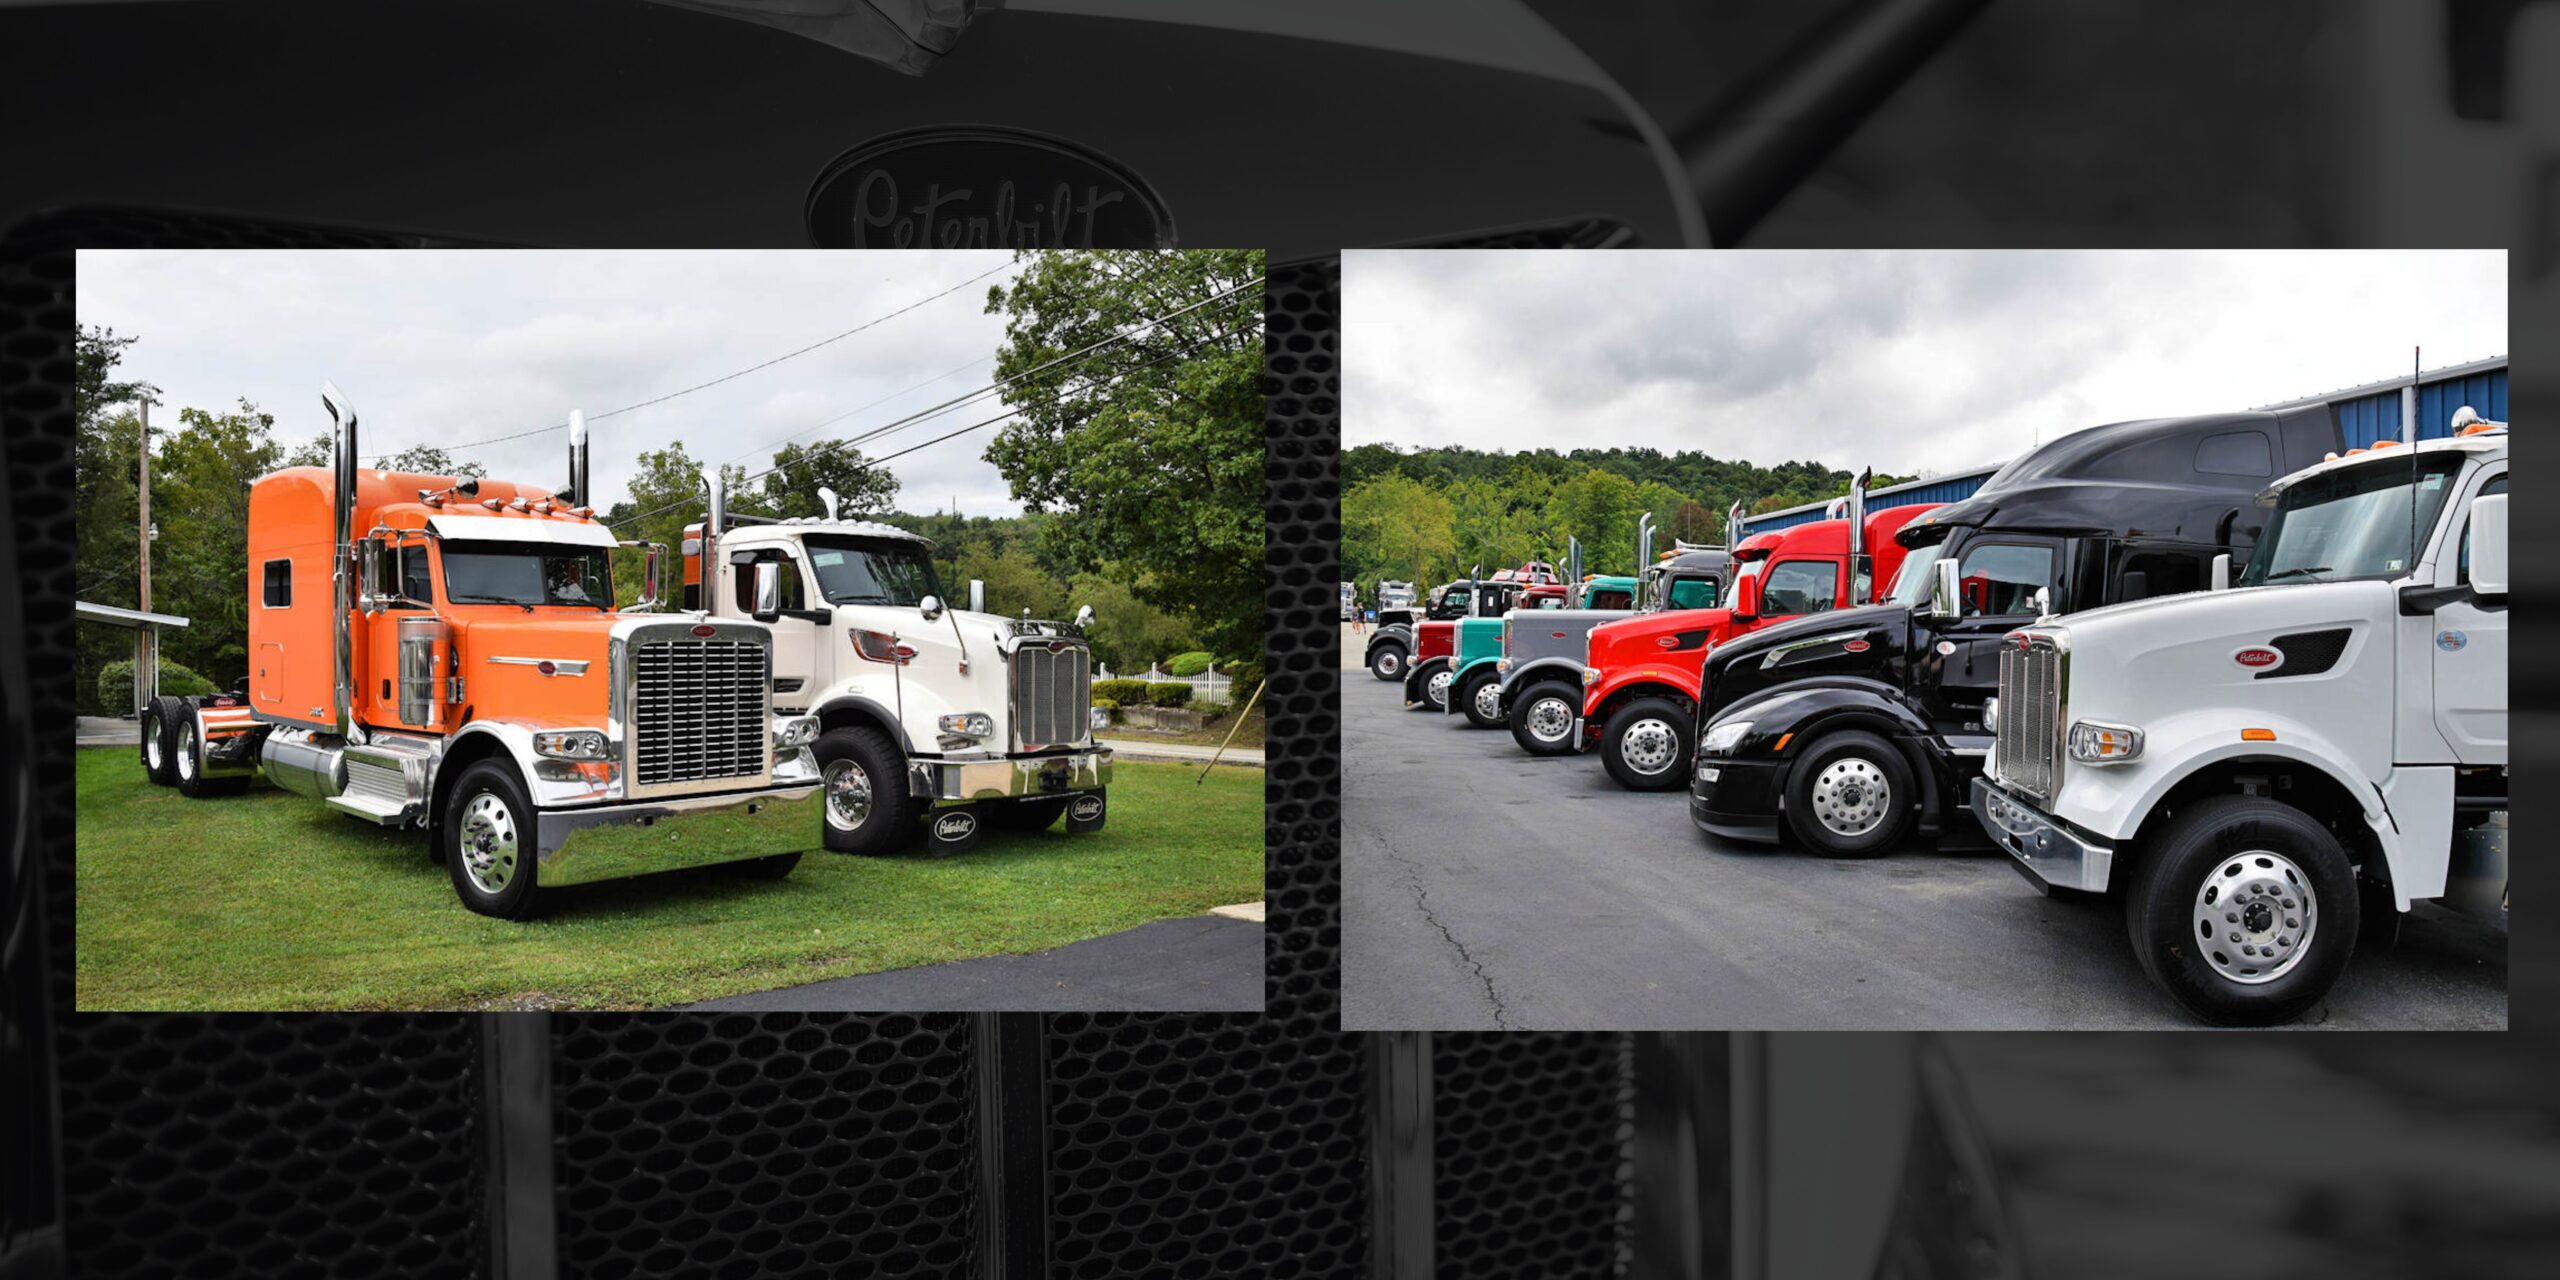 Hunter Truck Butler at Cable Truck Show 